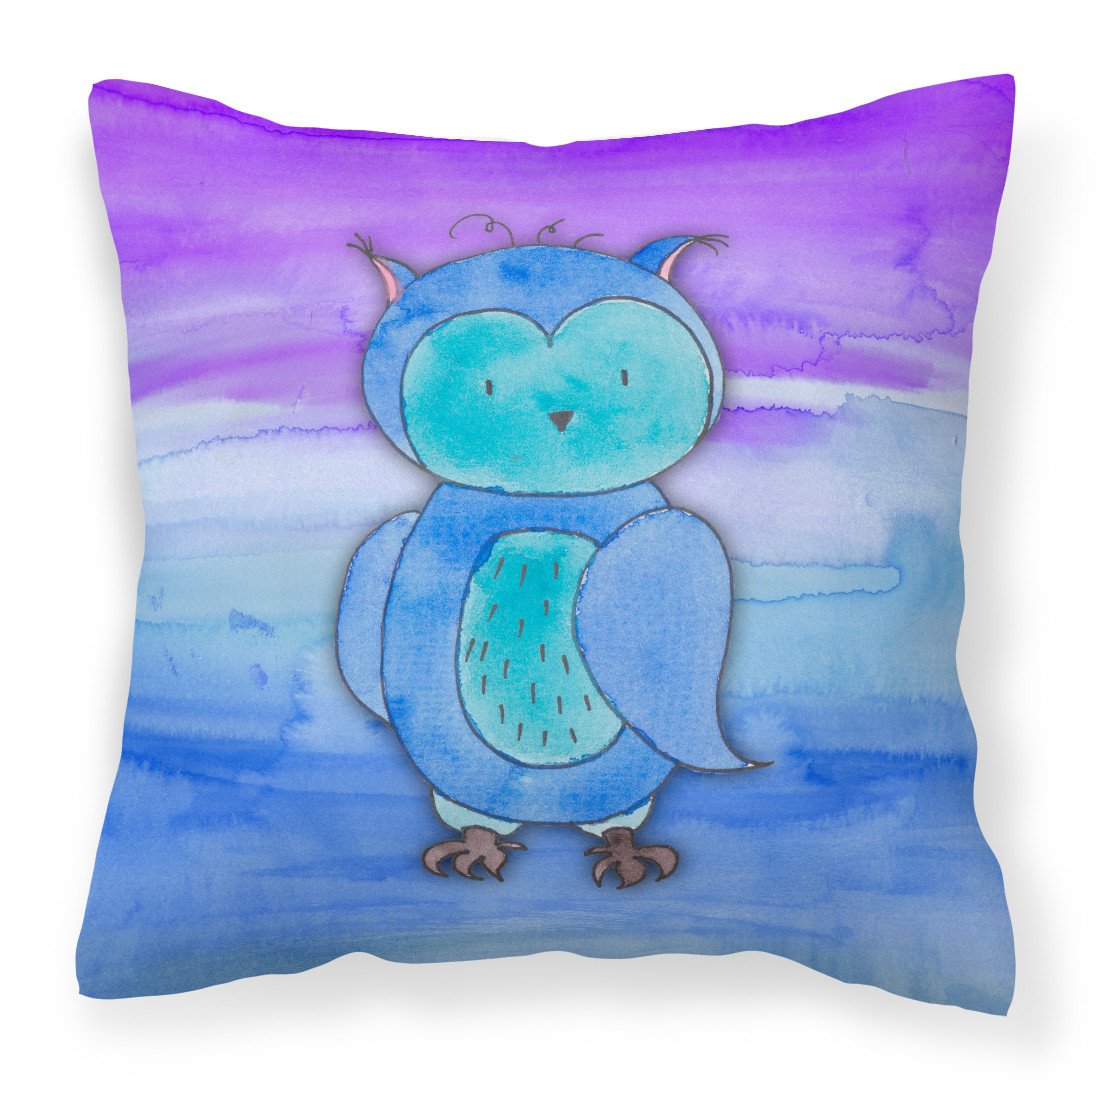 Blue Owl Watercolor Fabric Decorative Pillow BB7426PW1818 by Caroline's Treasures